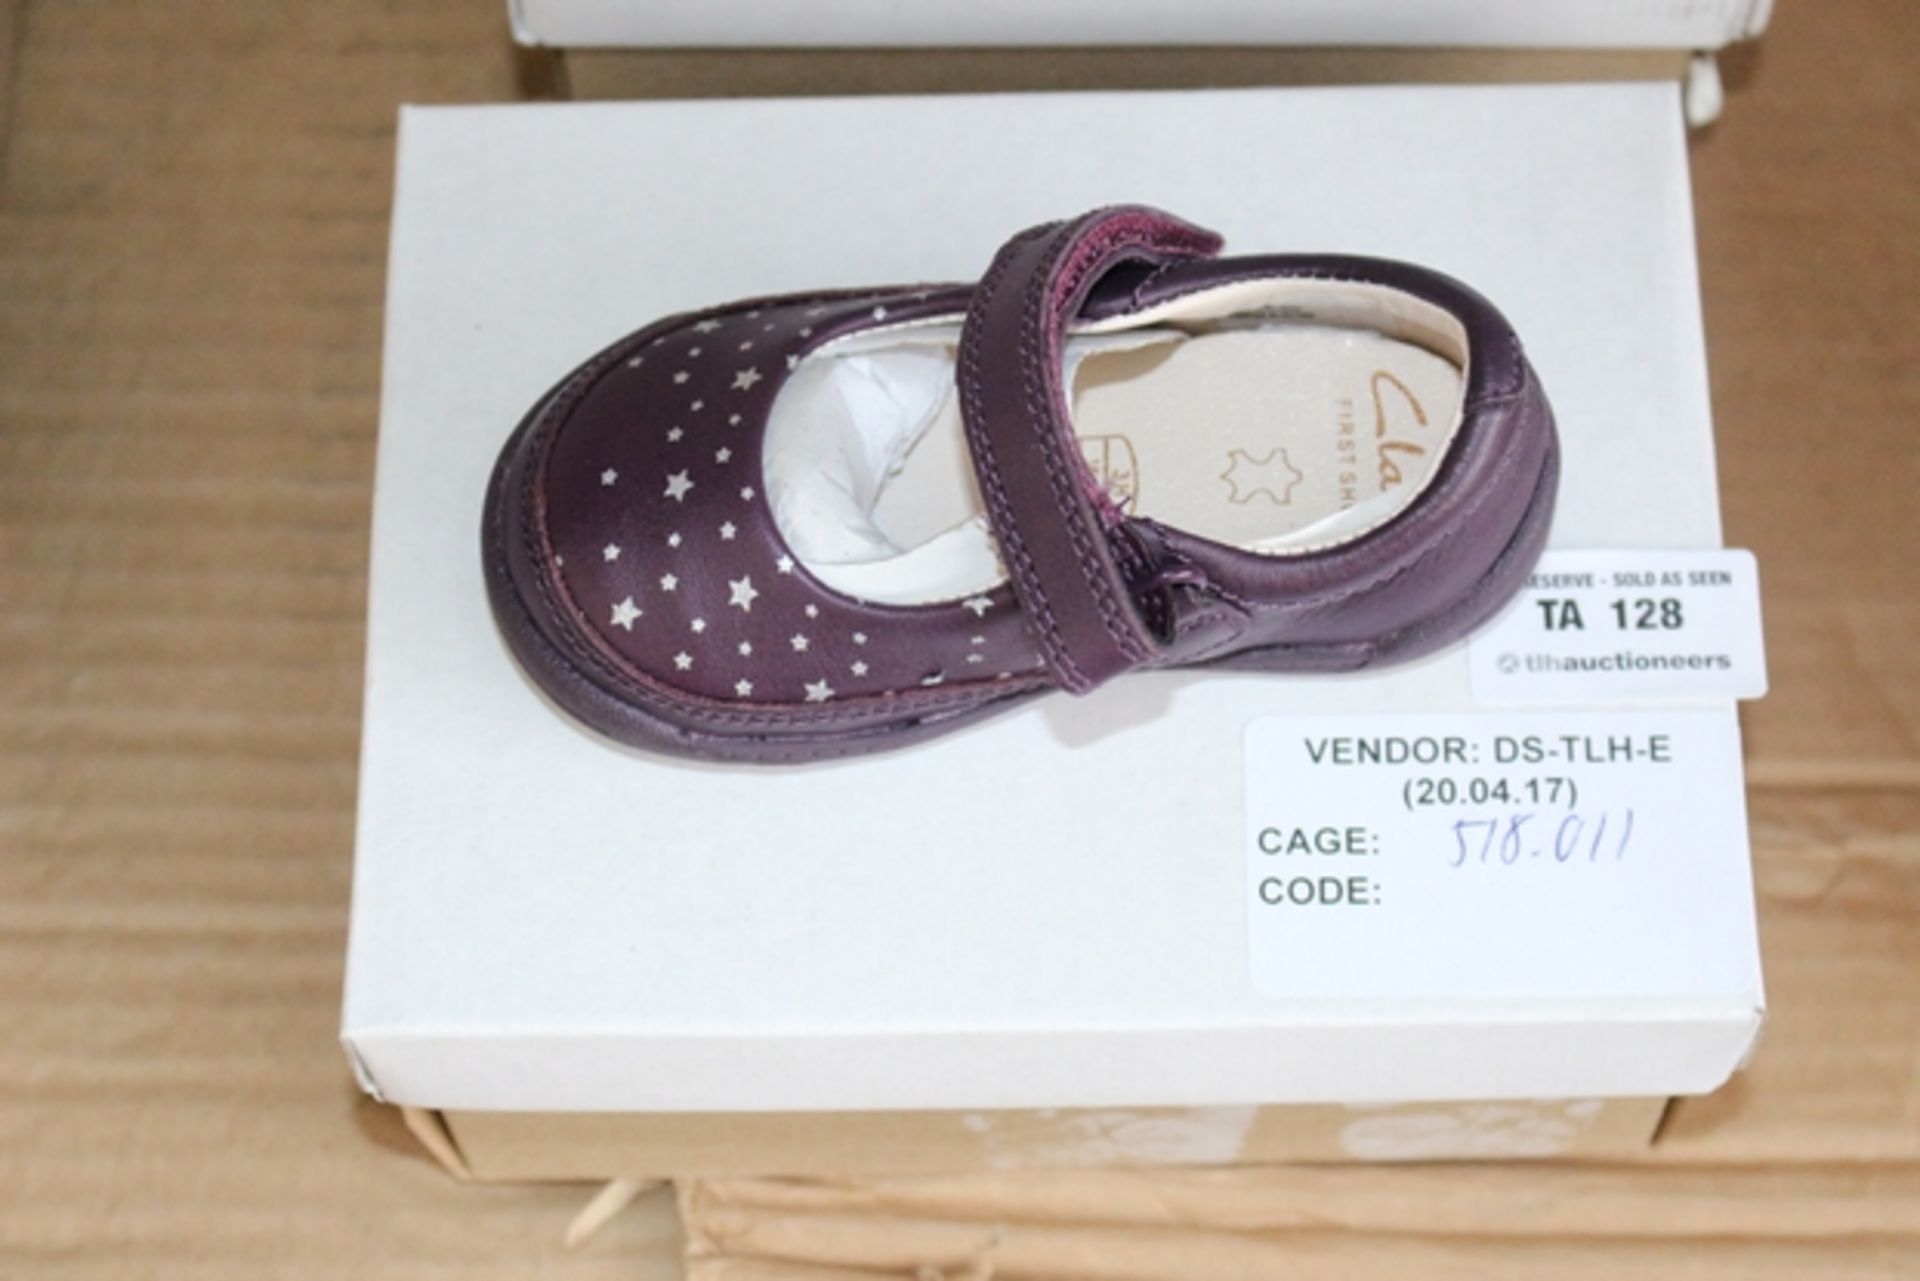 1X BOXED UNUSED PAIR OF CLARKES CHILDREN'S SHOES SIZE 3H RRP £30 (DS-TLH-E) (518.011)